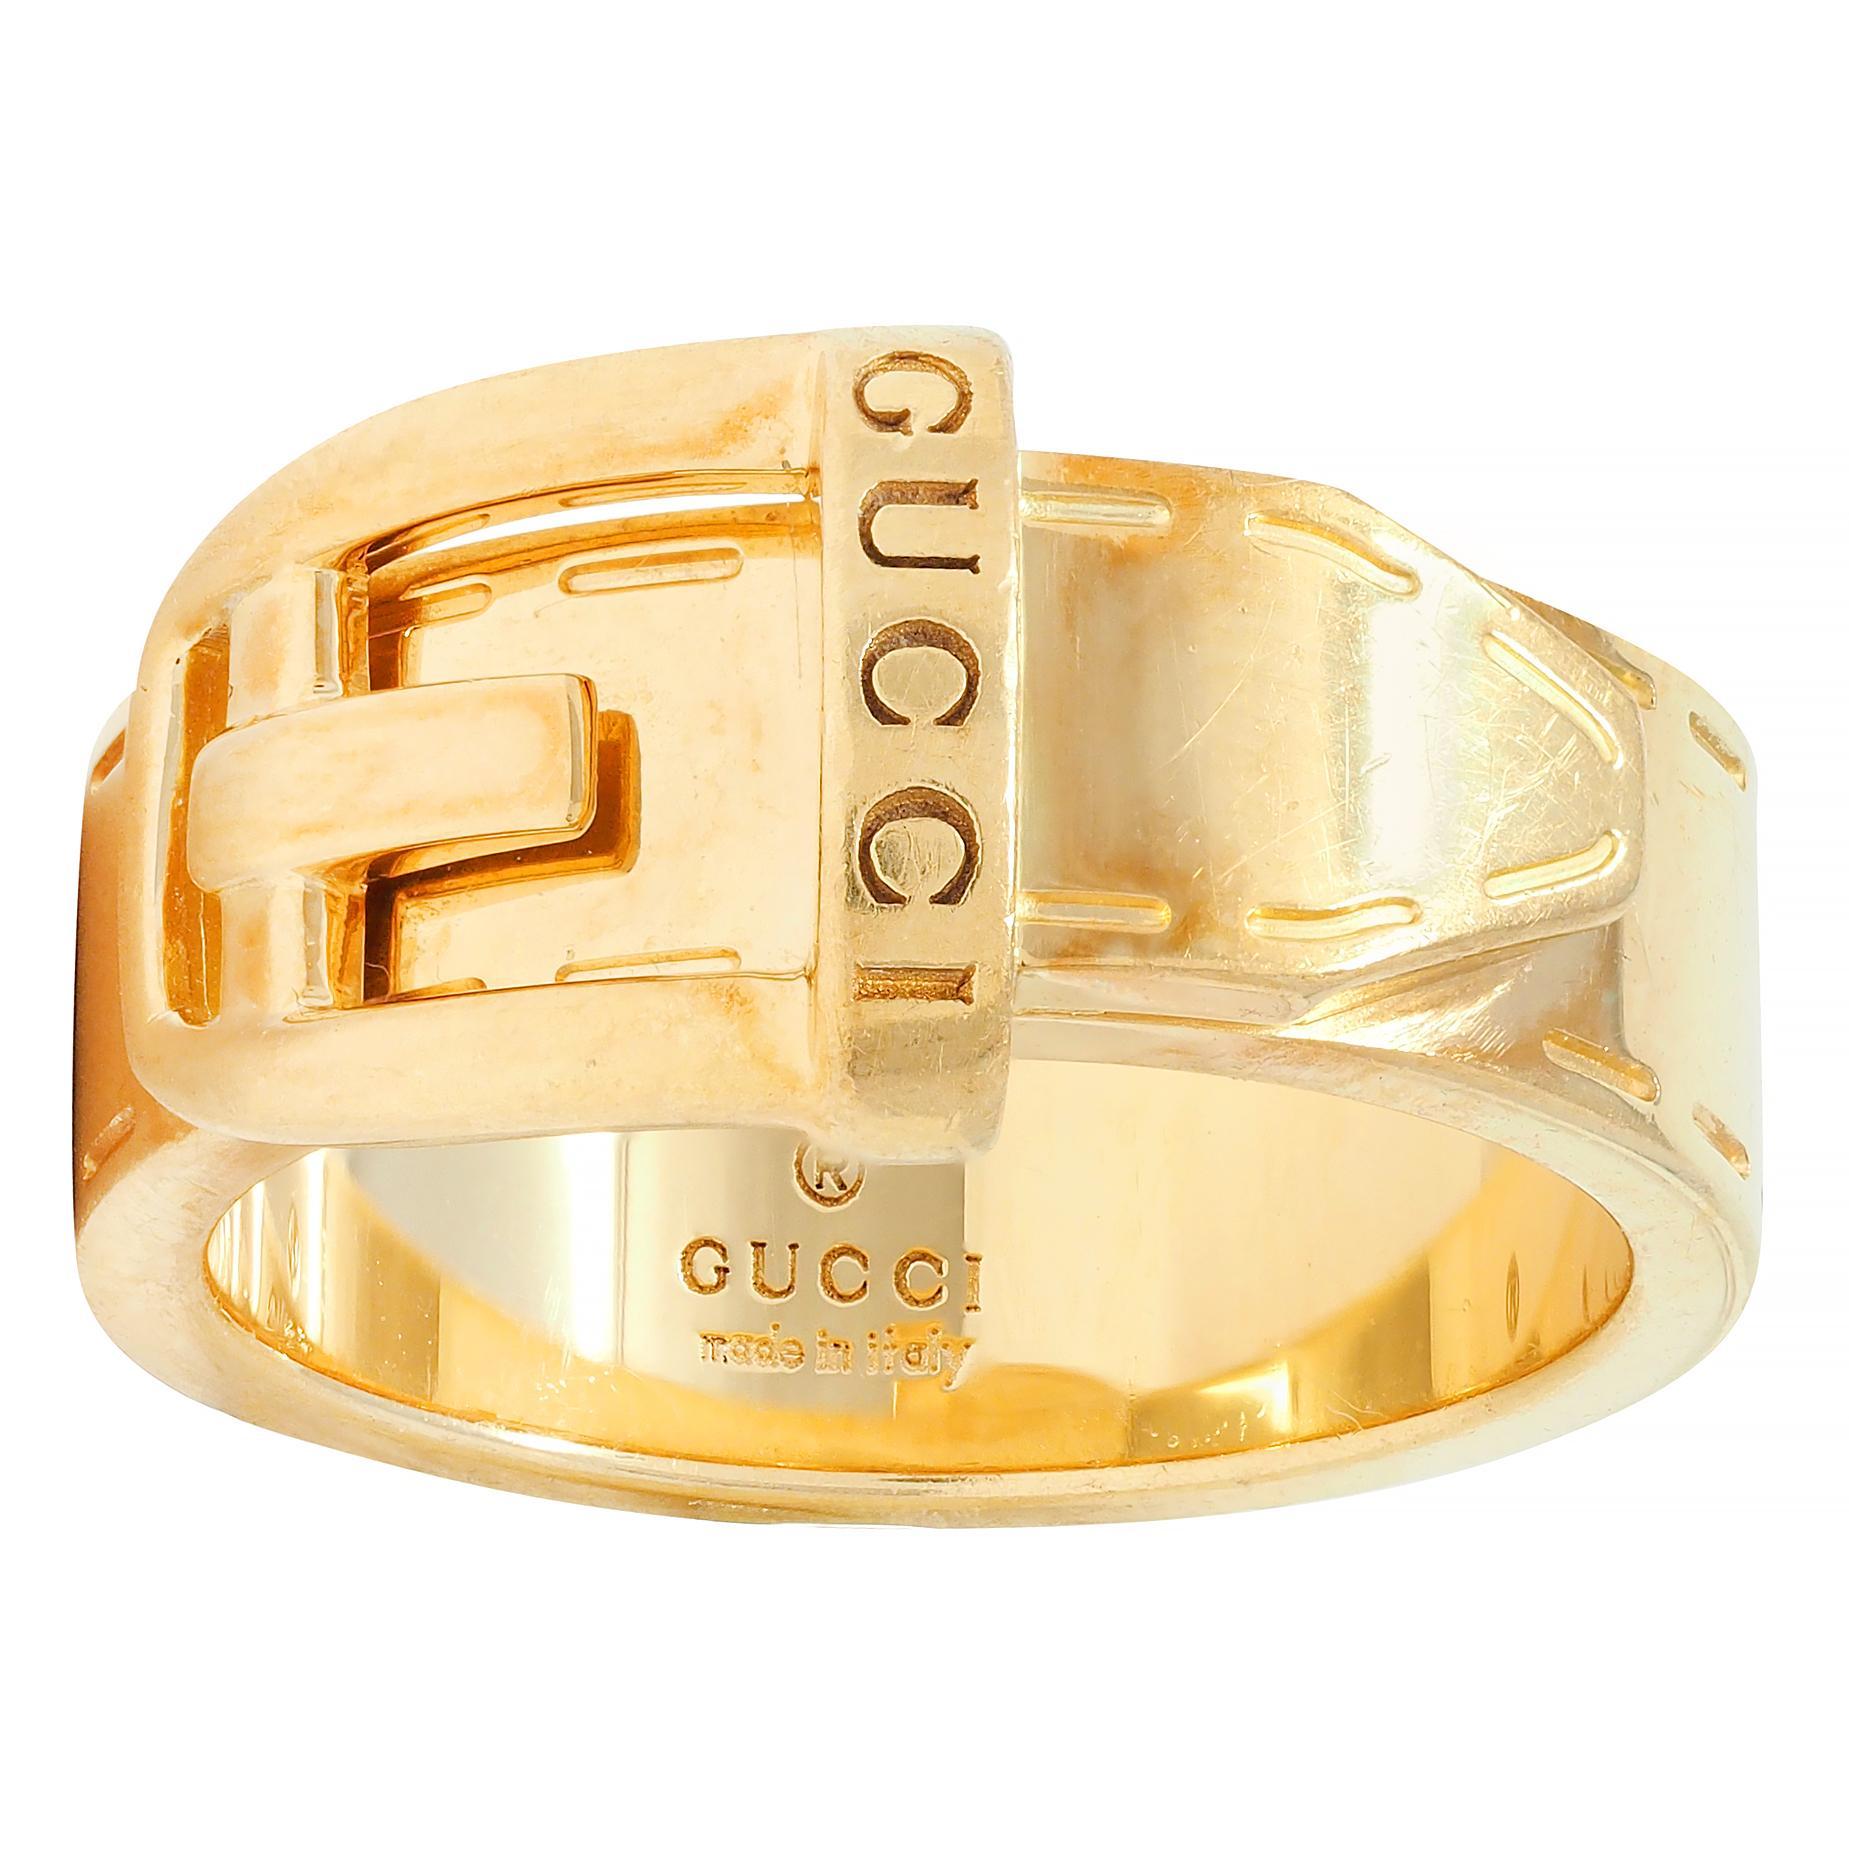 Gucci Contemporary 18 Karat Yellow Gold Belt Buckle Band Ring For Sale 2